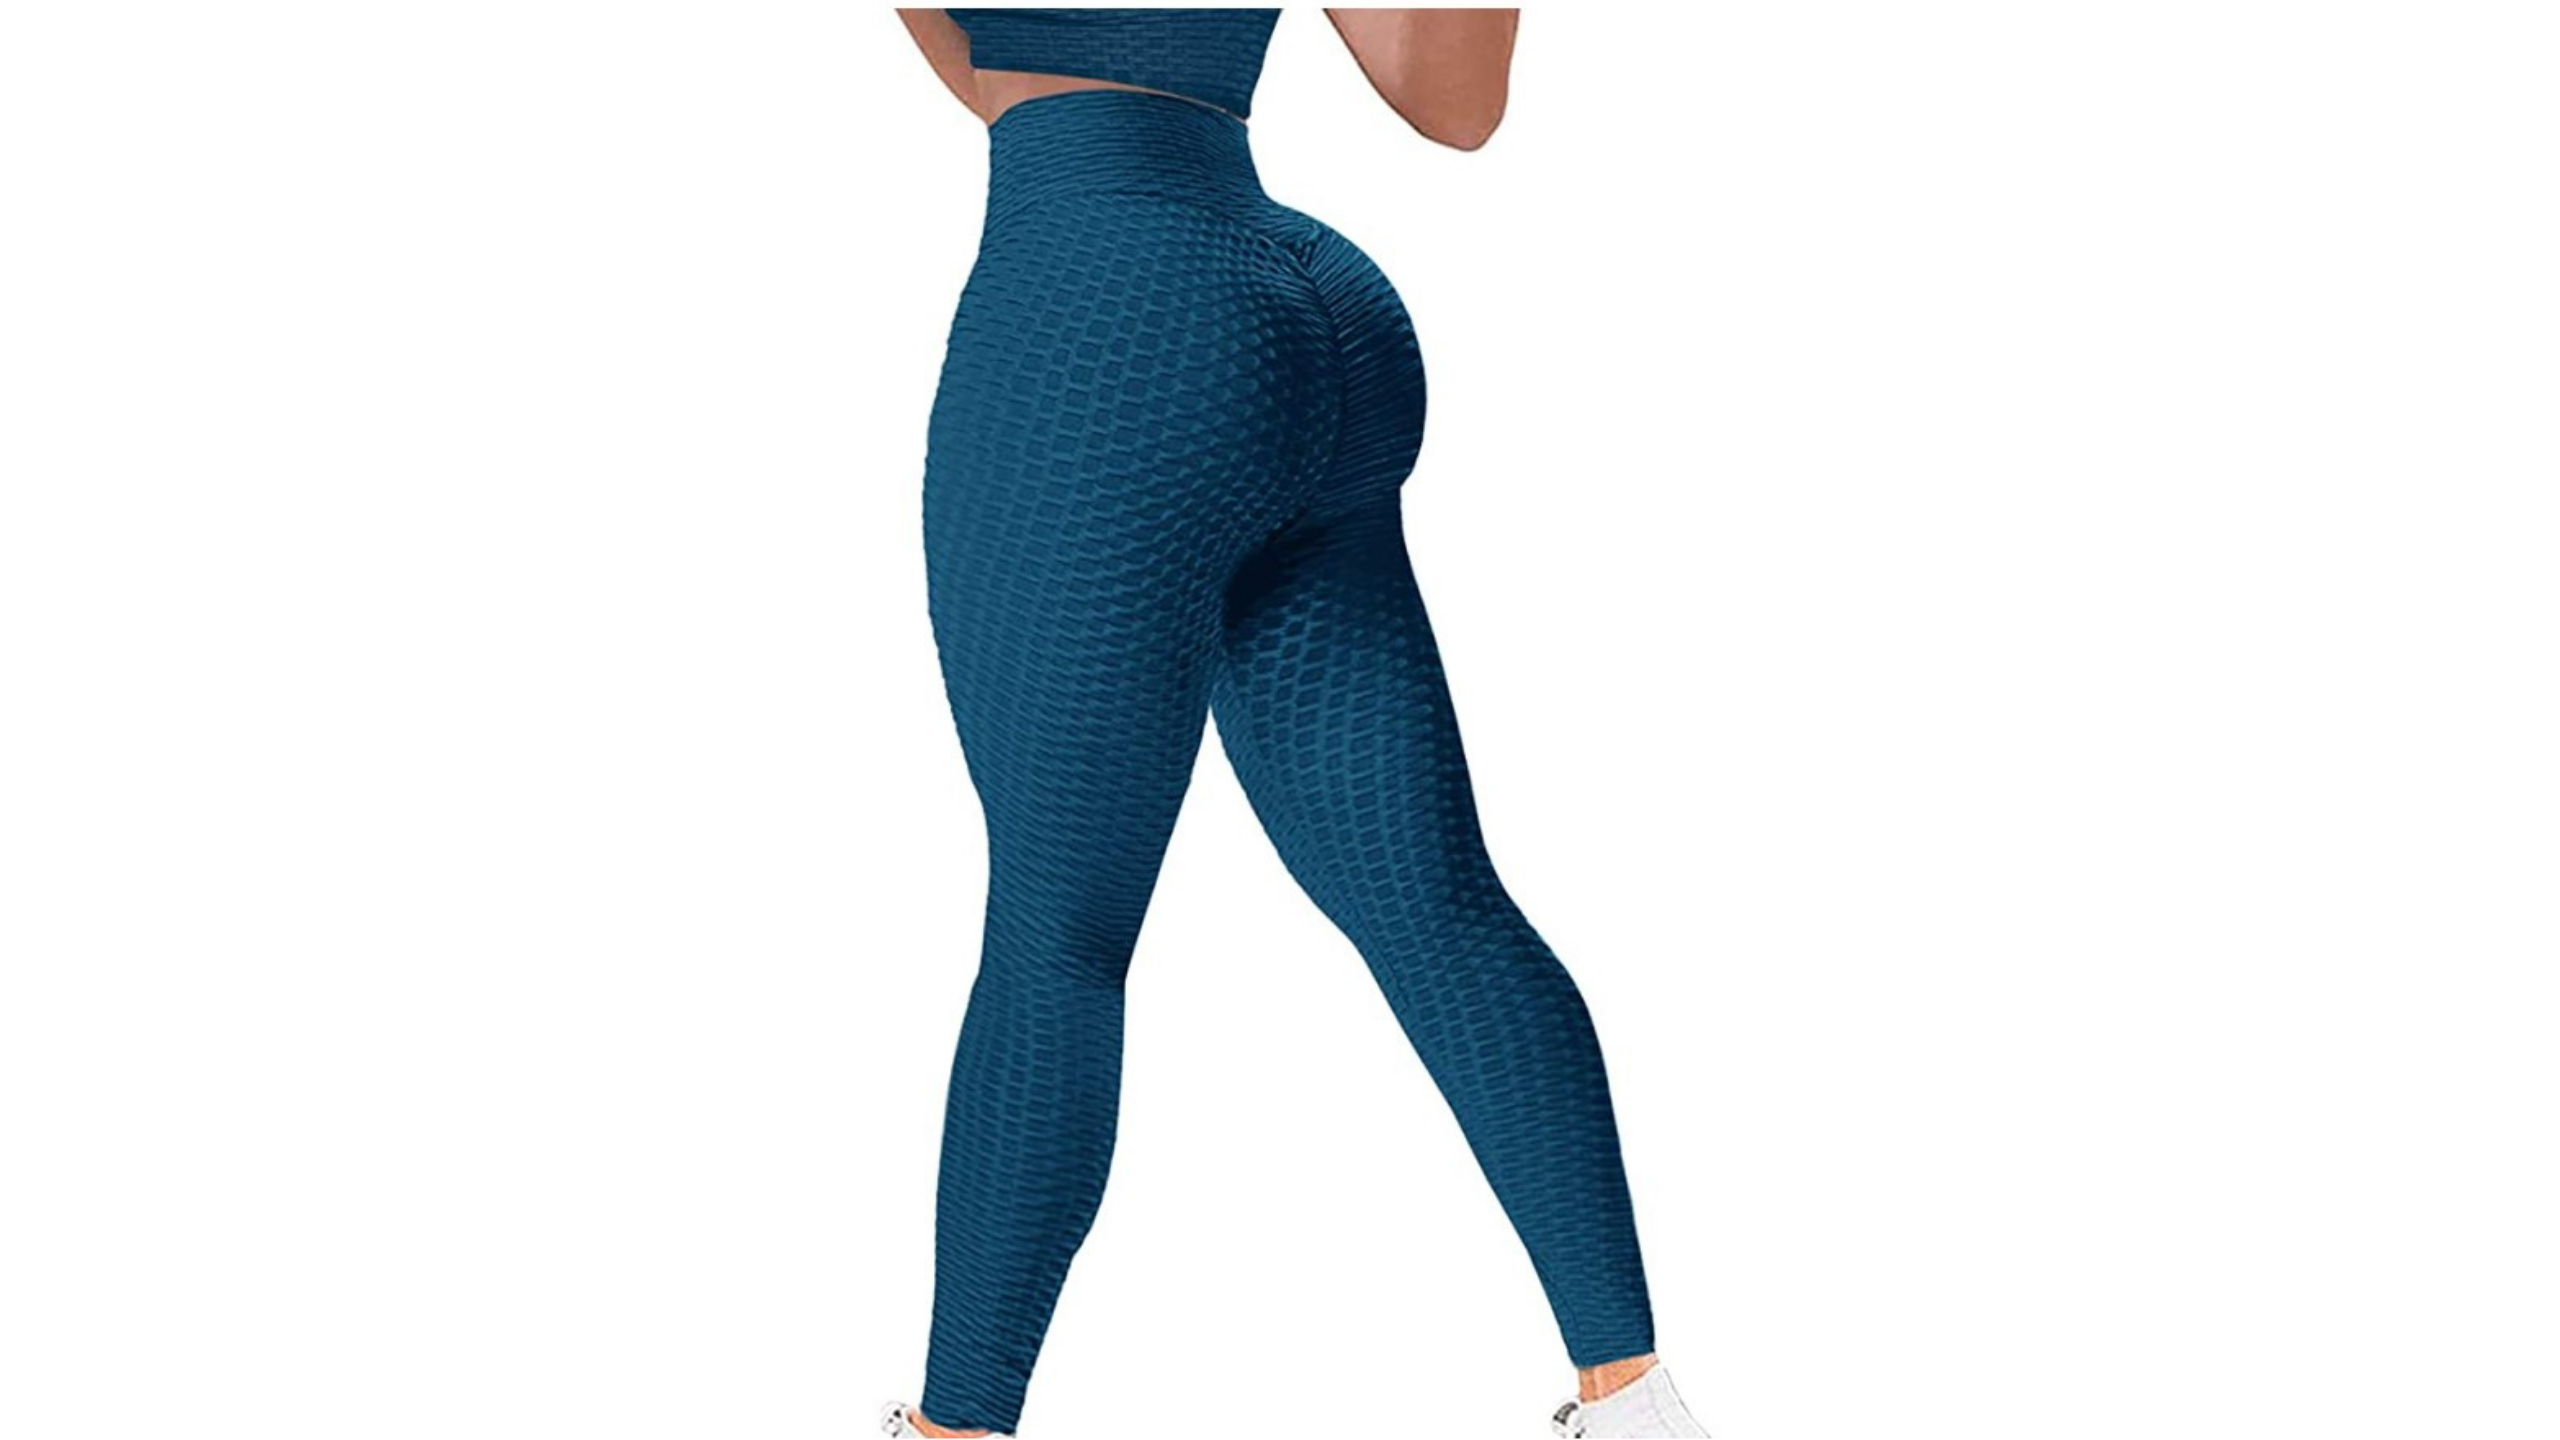 There's a TikTok Cross Waist Leggings Dupe at Amazon